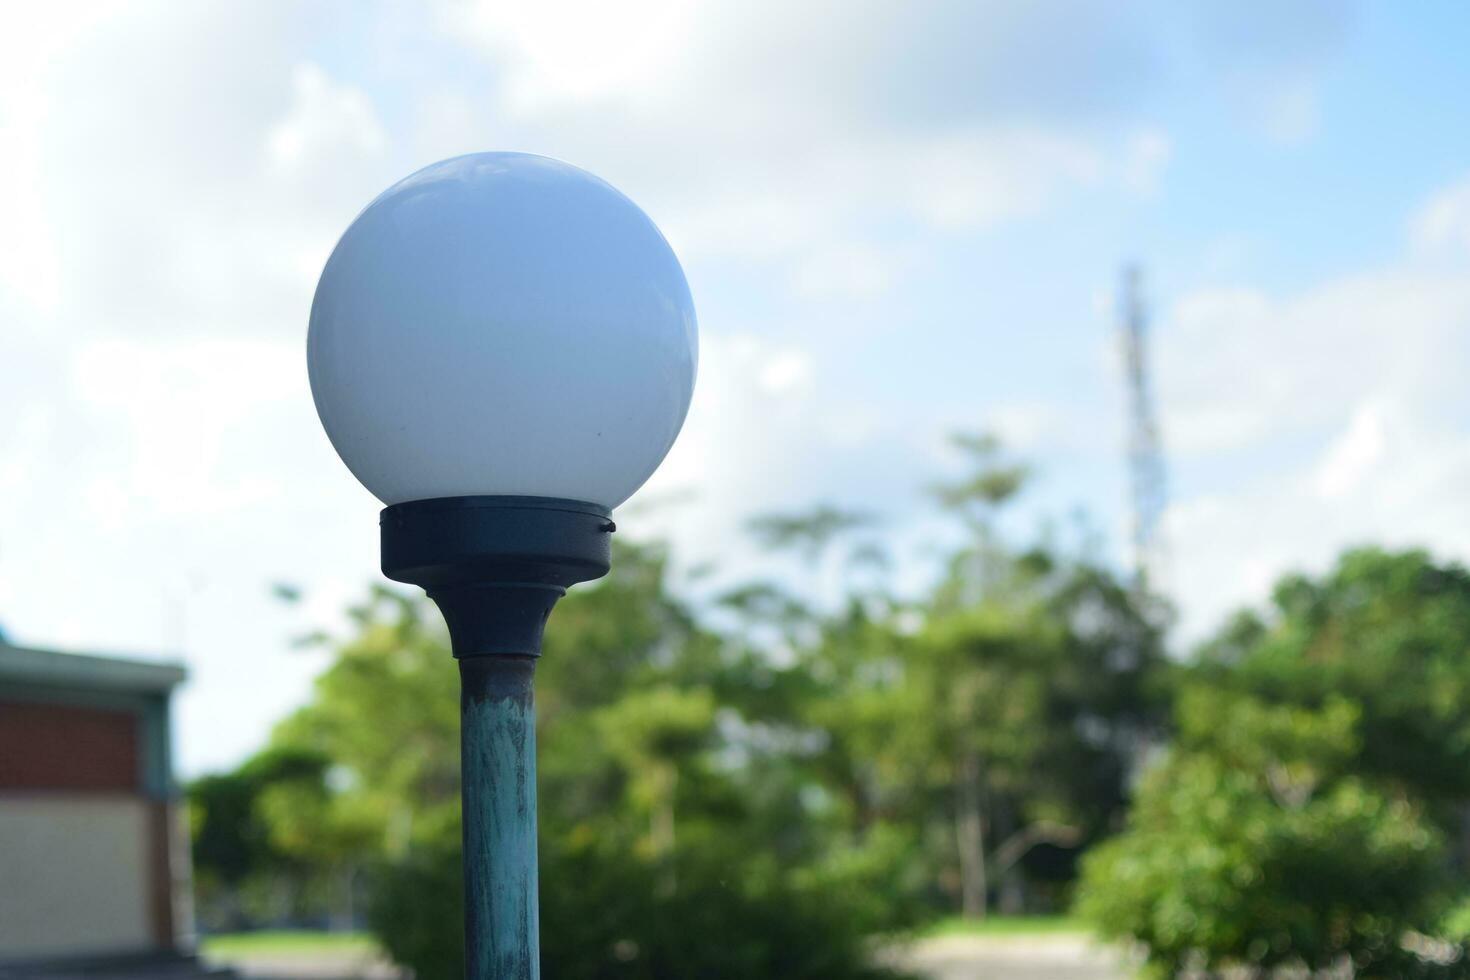 rural road lamp, White lamp on a steel pole, outdoor, selectable focus. photo